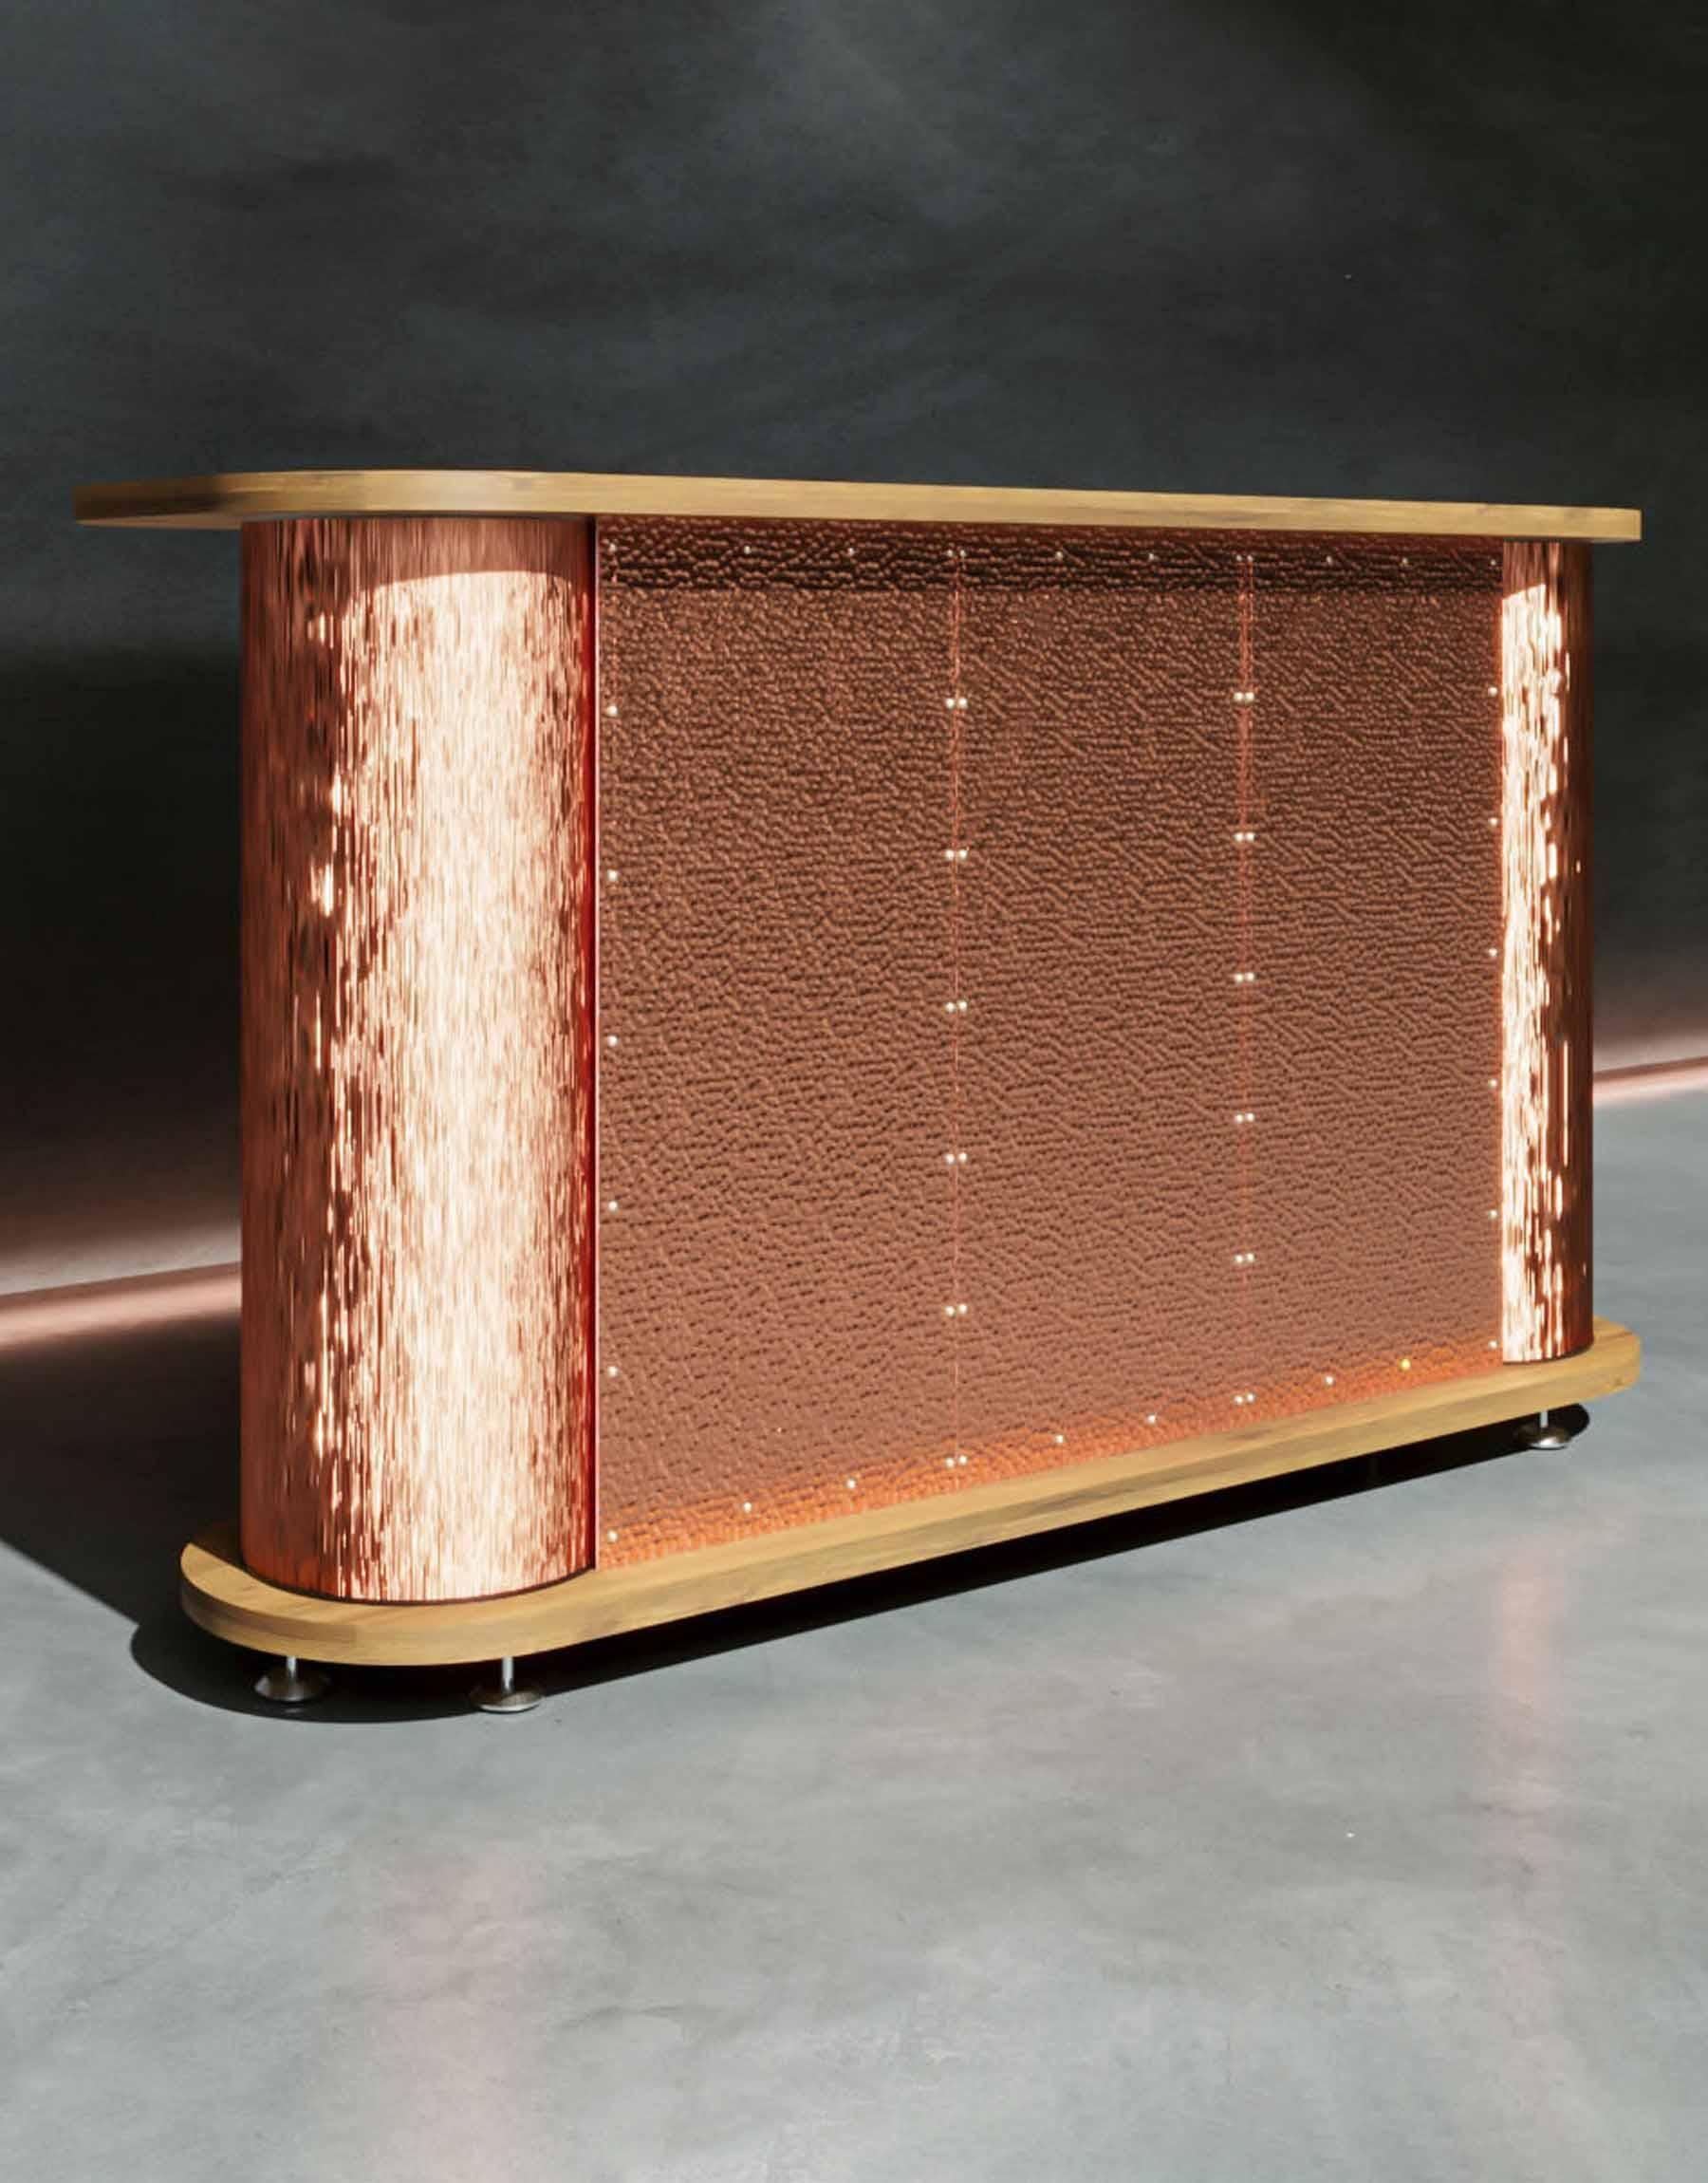 Discover our hand-hammered and hand-brushed genuine copper reception desk, complete with steel frame, entirely hand-crafted. This prestigious piece will add unforgettable charm to your business or workspace.

This unique copper counters has been